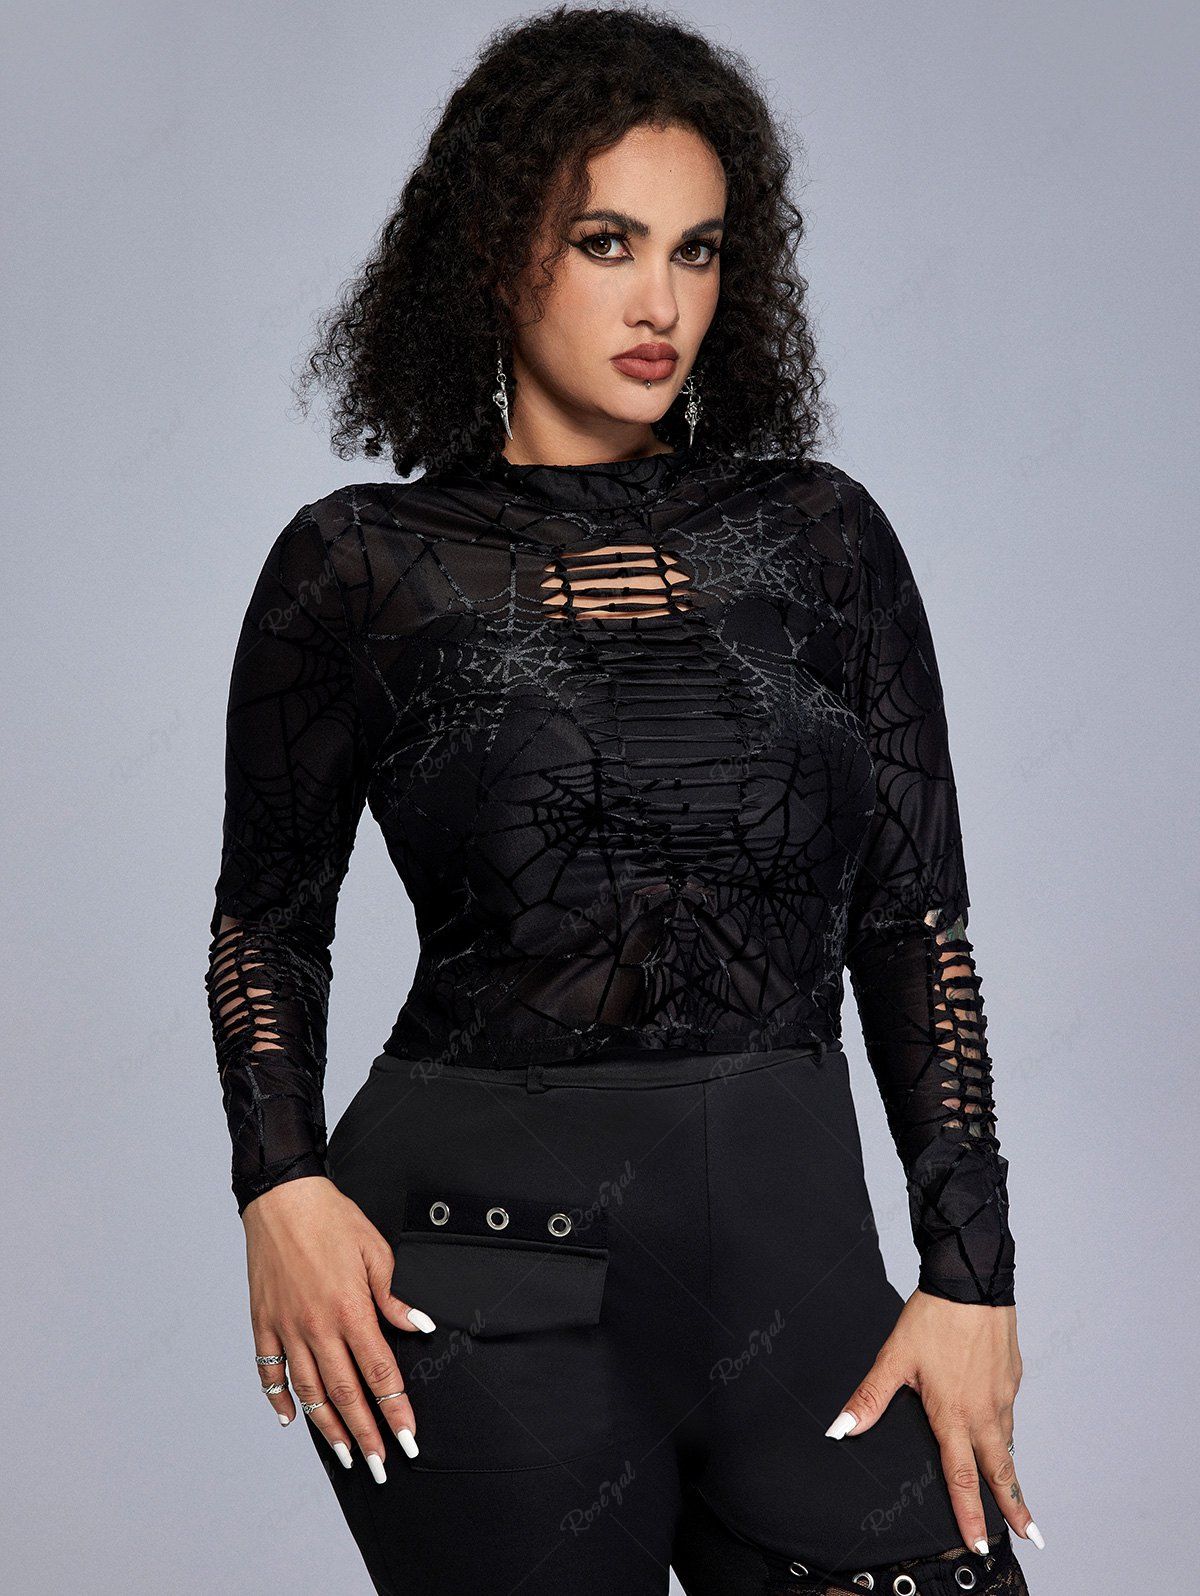 Hot Gothic Flocking Spider Web Ripped Cutout Top  